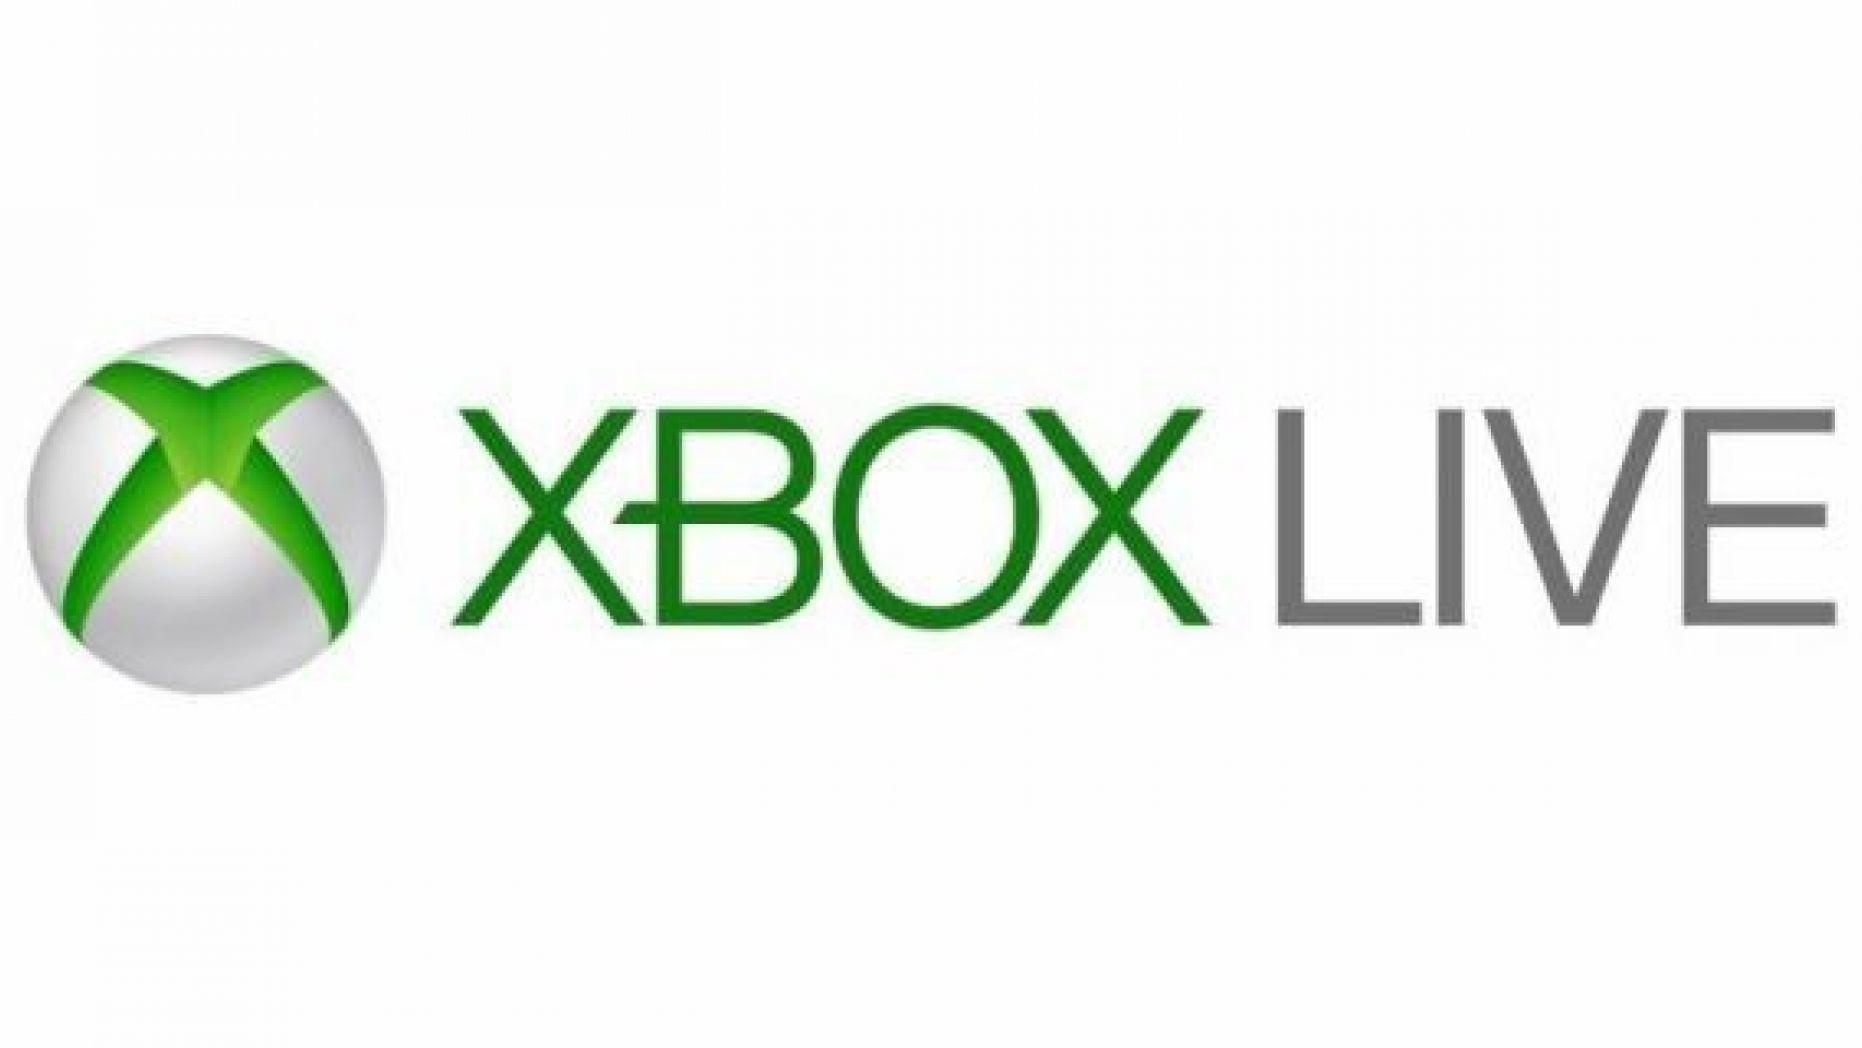 Xbox Looks Like with Green Circle Logo - Xbox Live to connect with Android, iOS, Nintendo Switch players ...